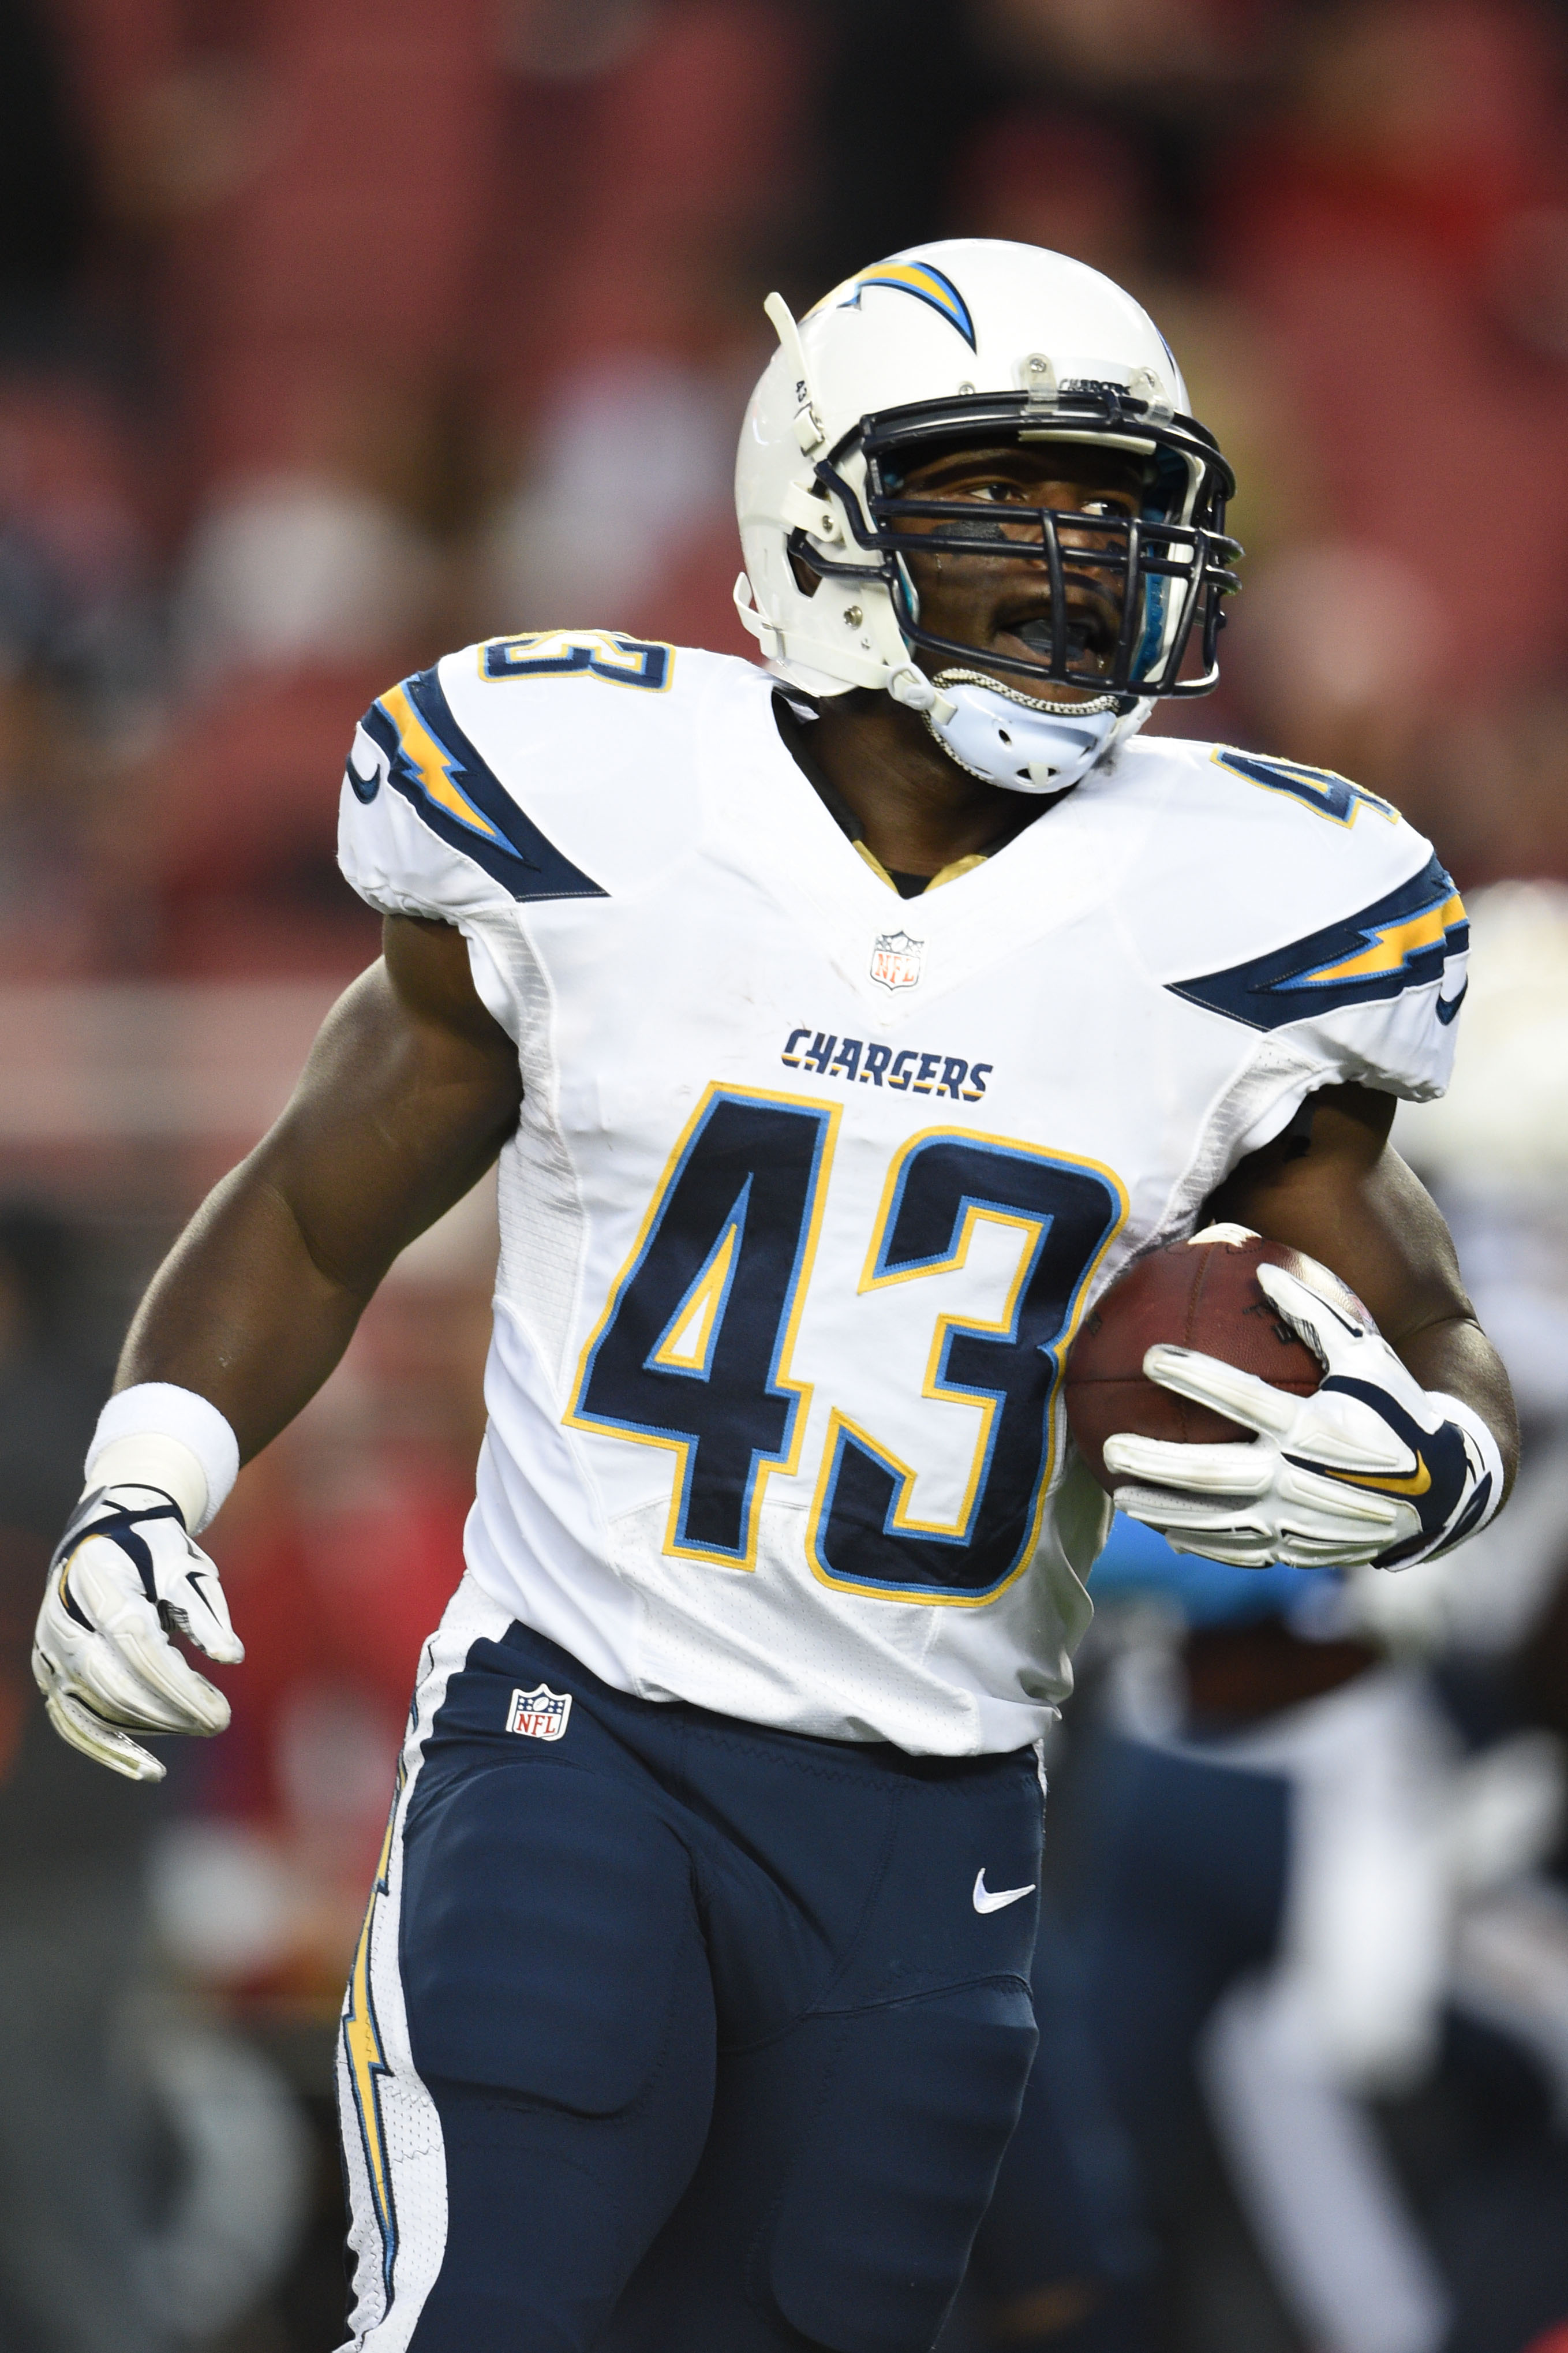 Chargers RB Branden Oliver Tears Achilles